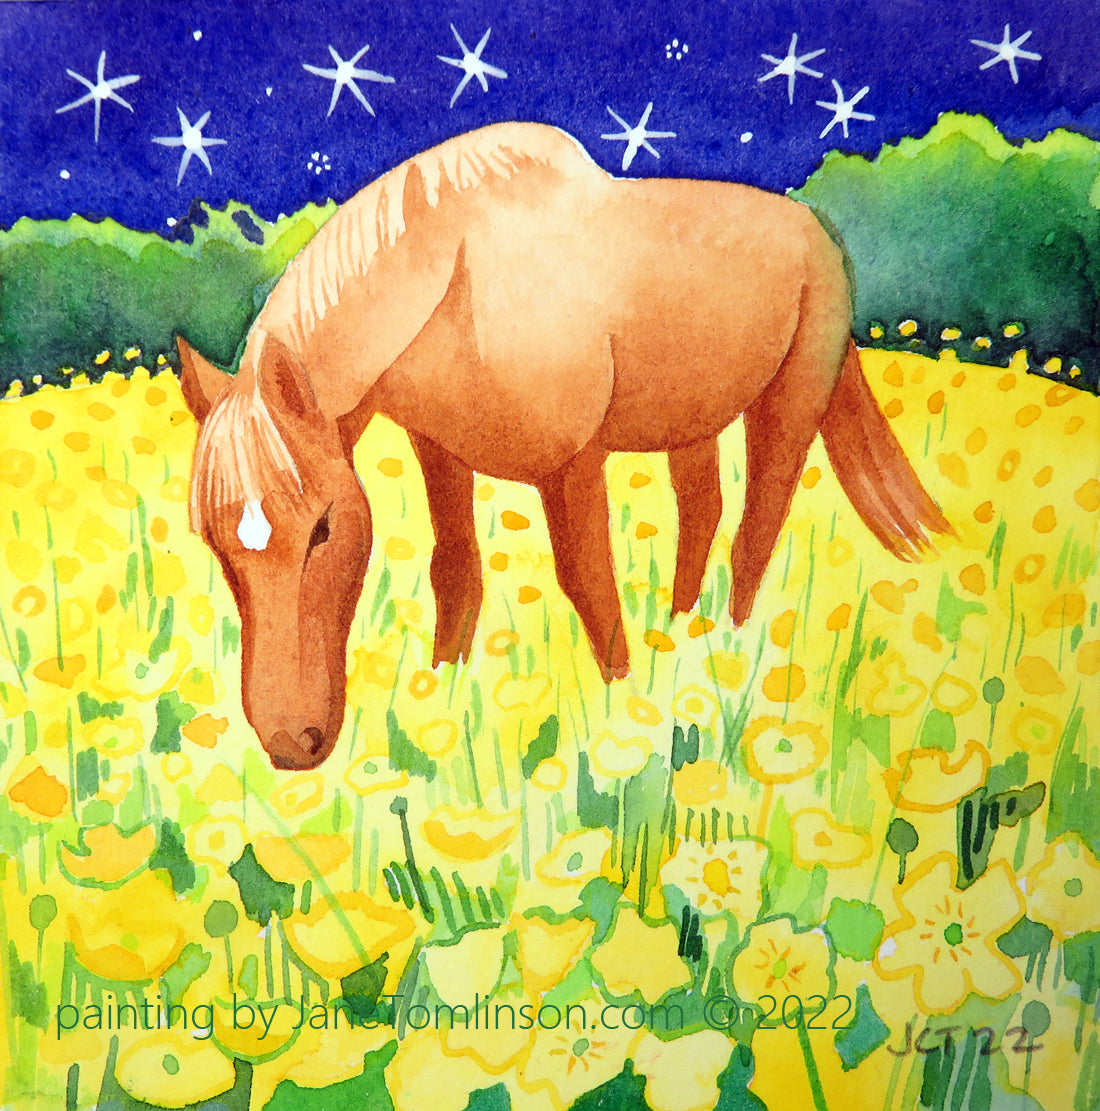 A painting of a horse in a buttercup meadow